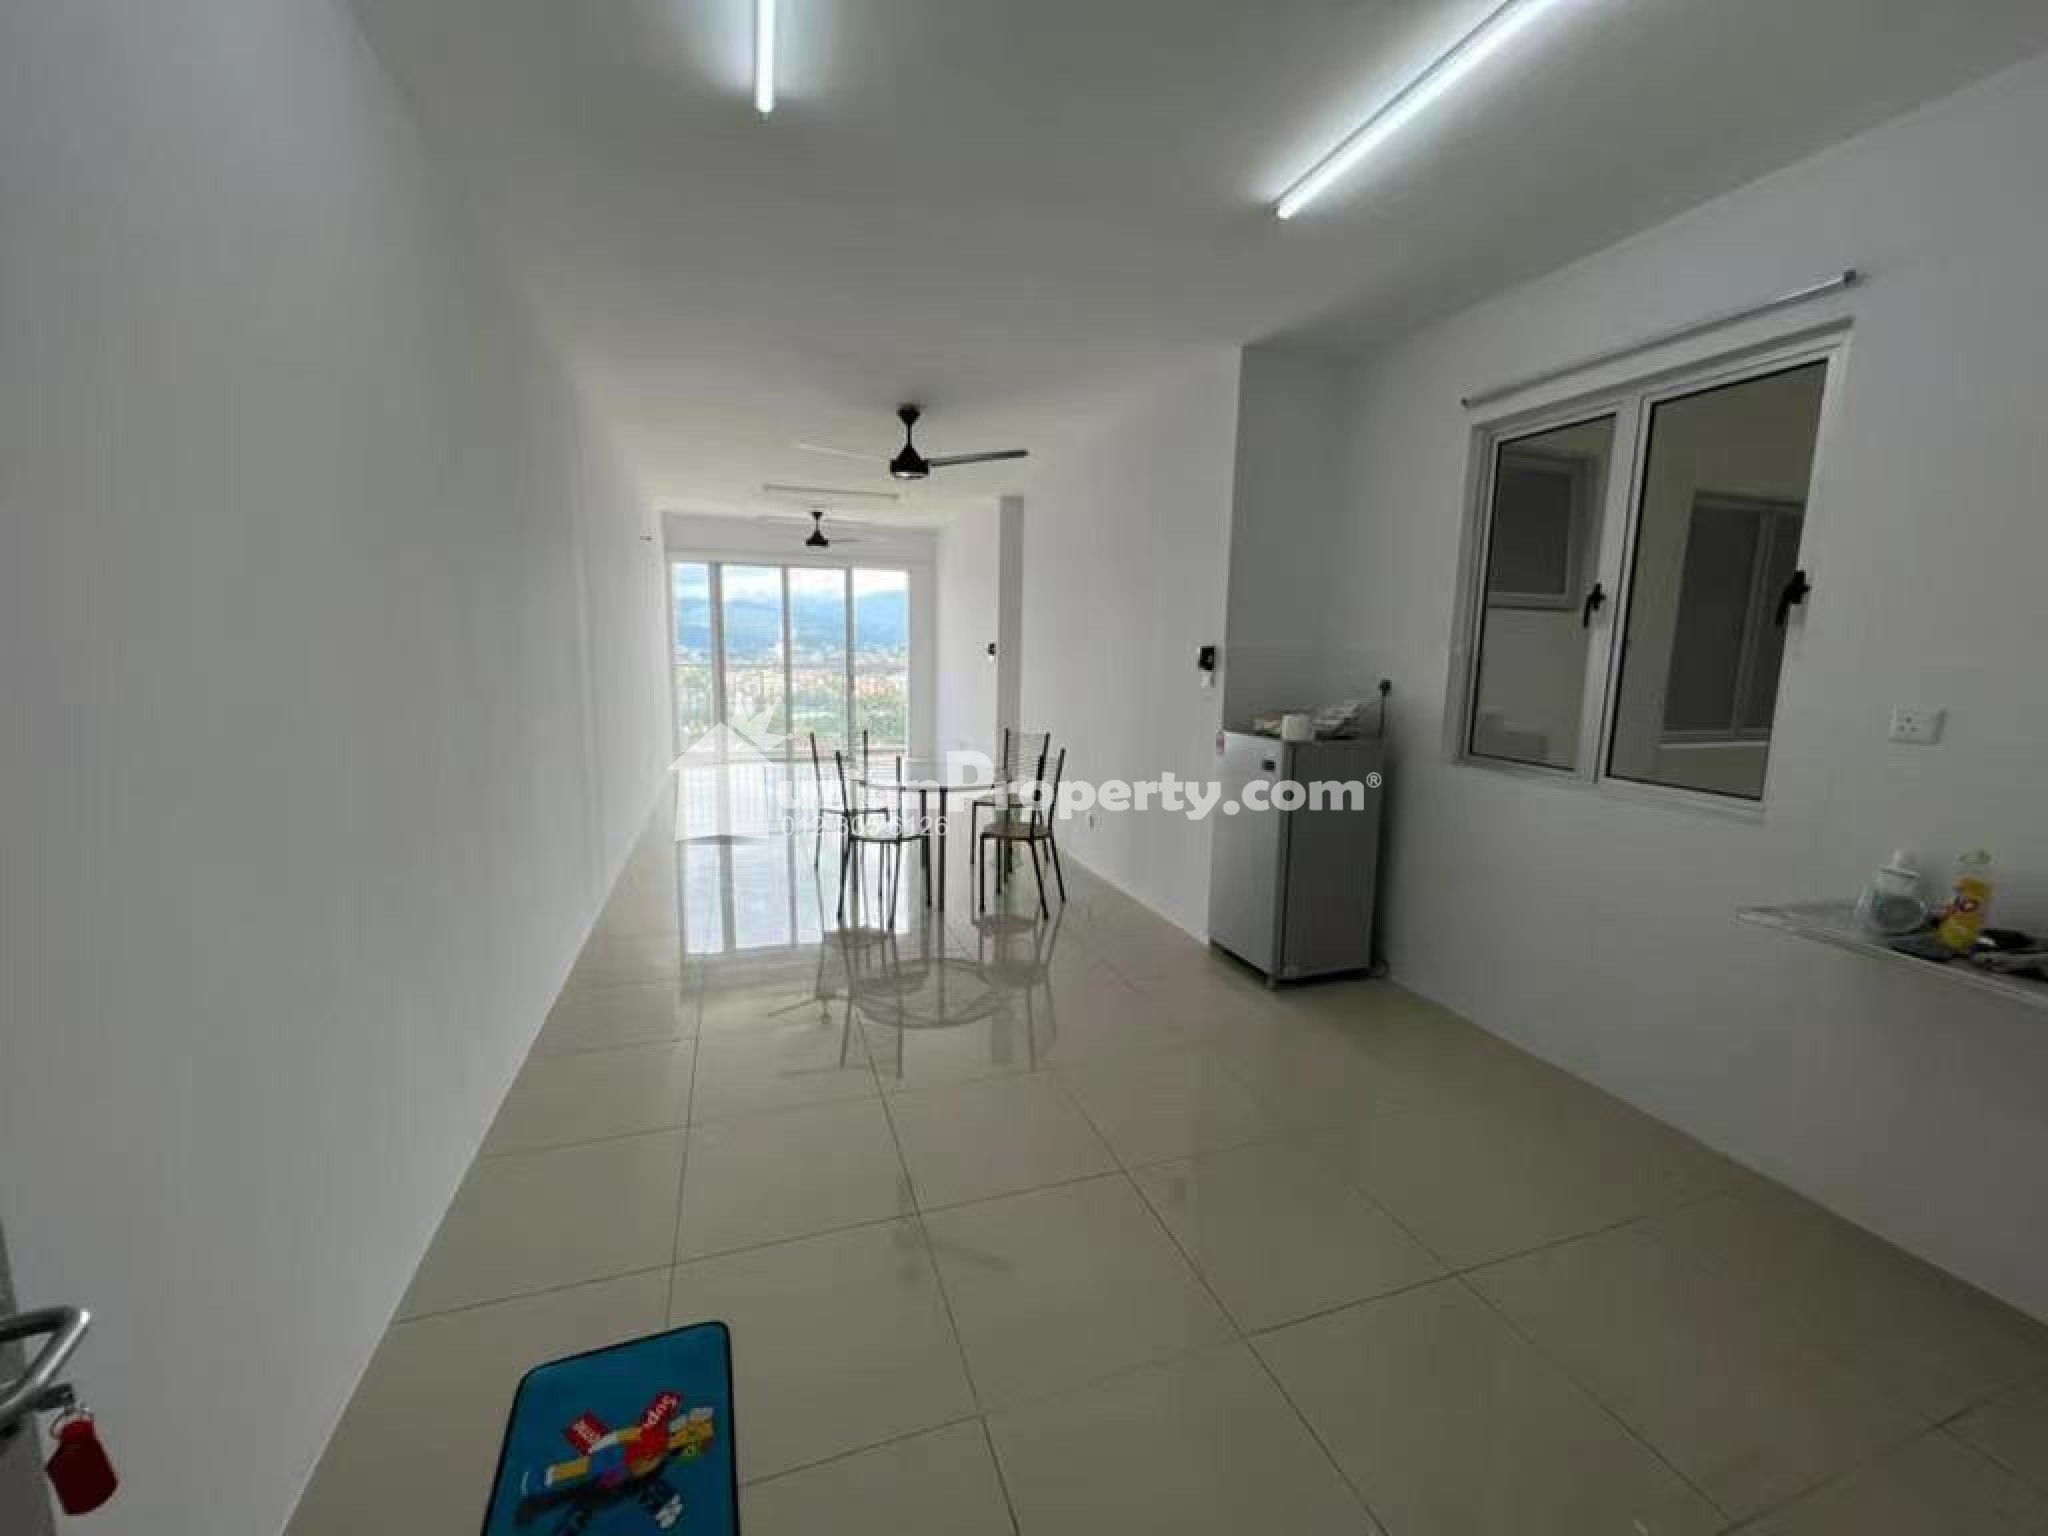 Condo For Sale at PV 18 Residence